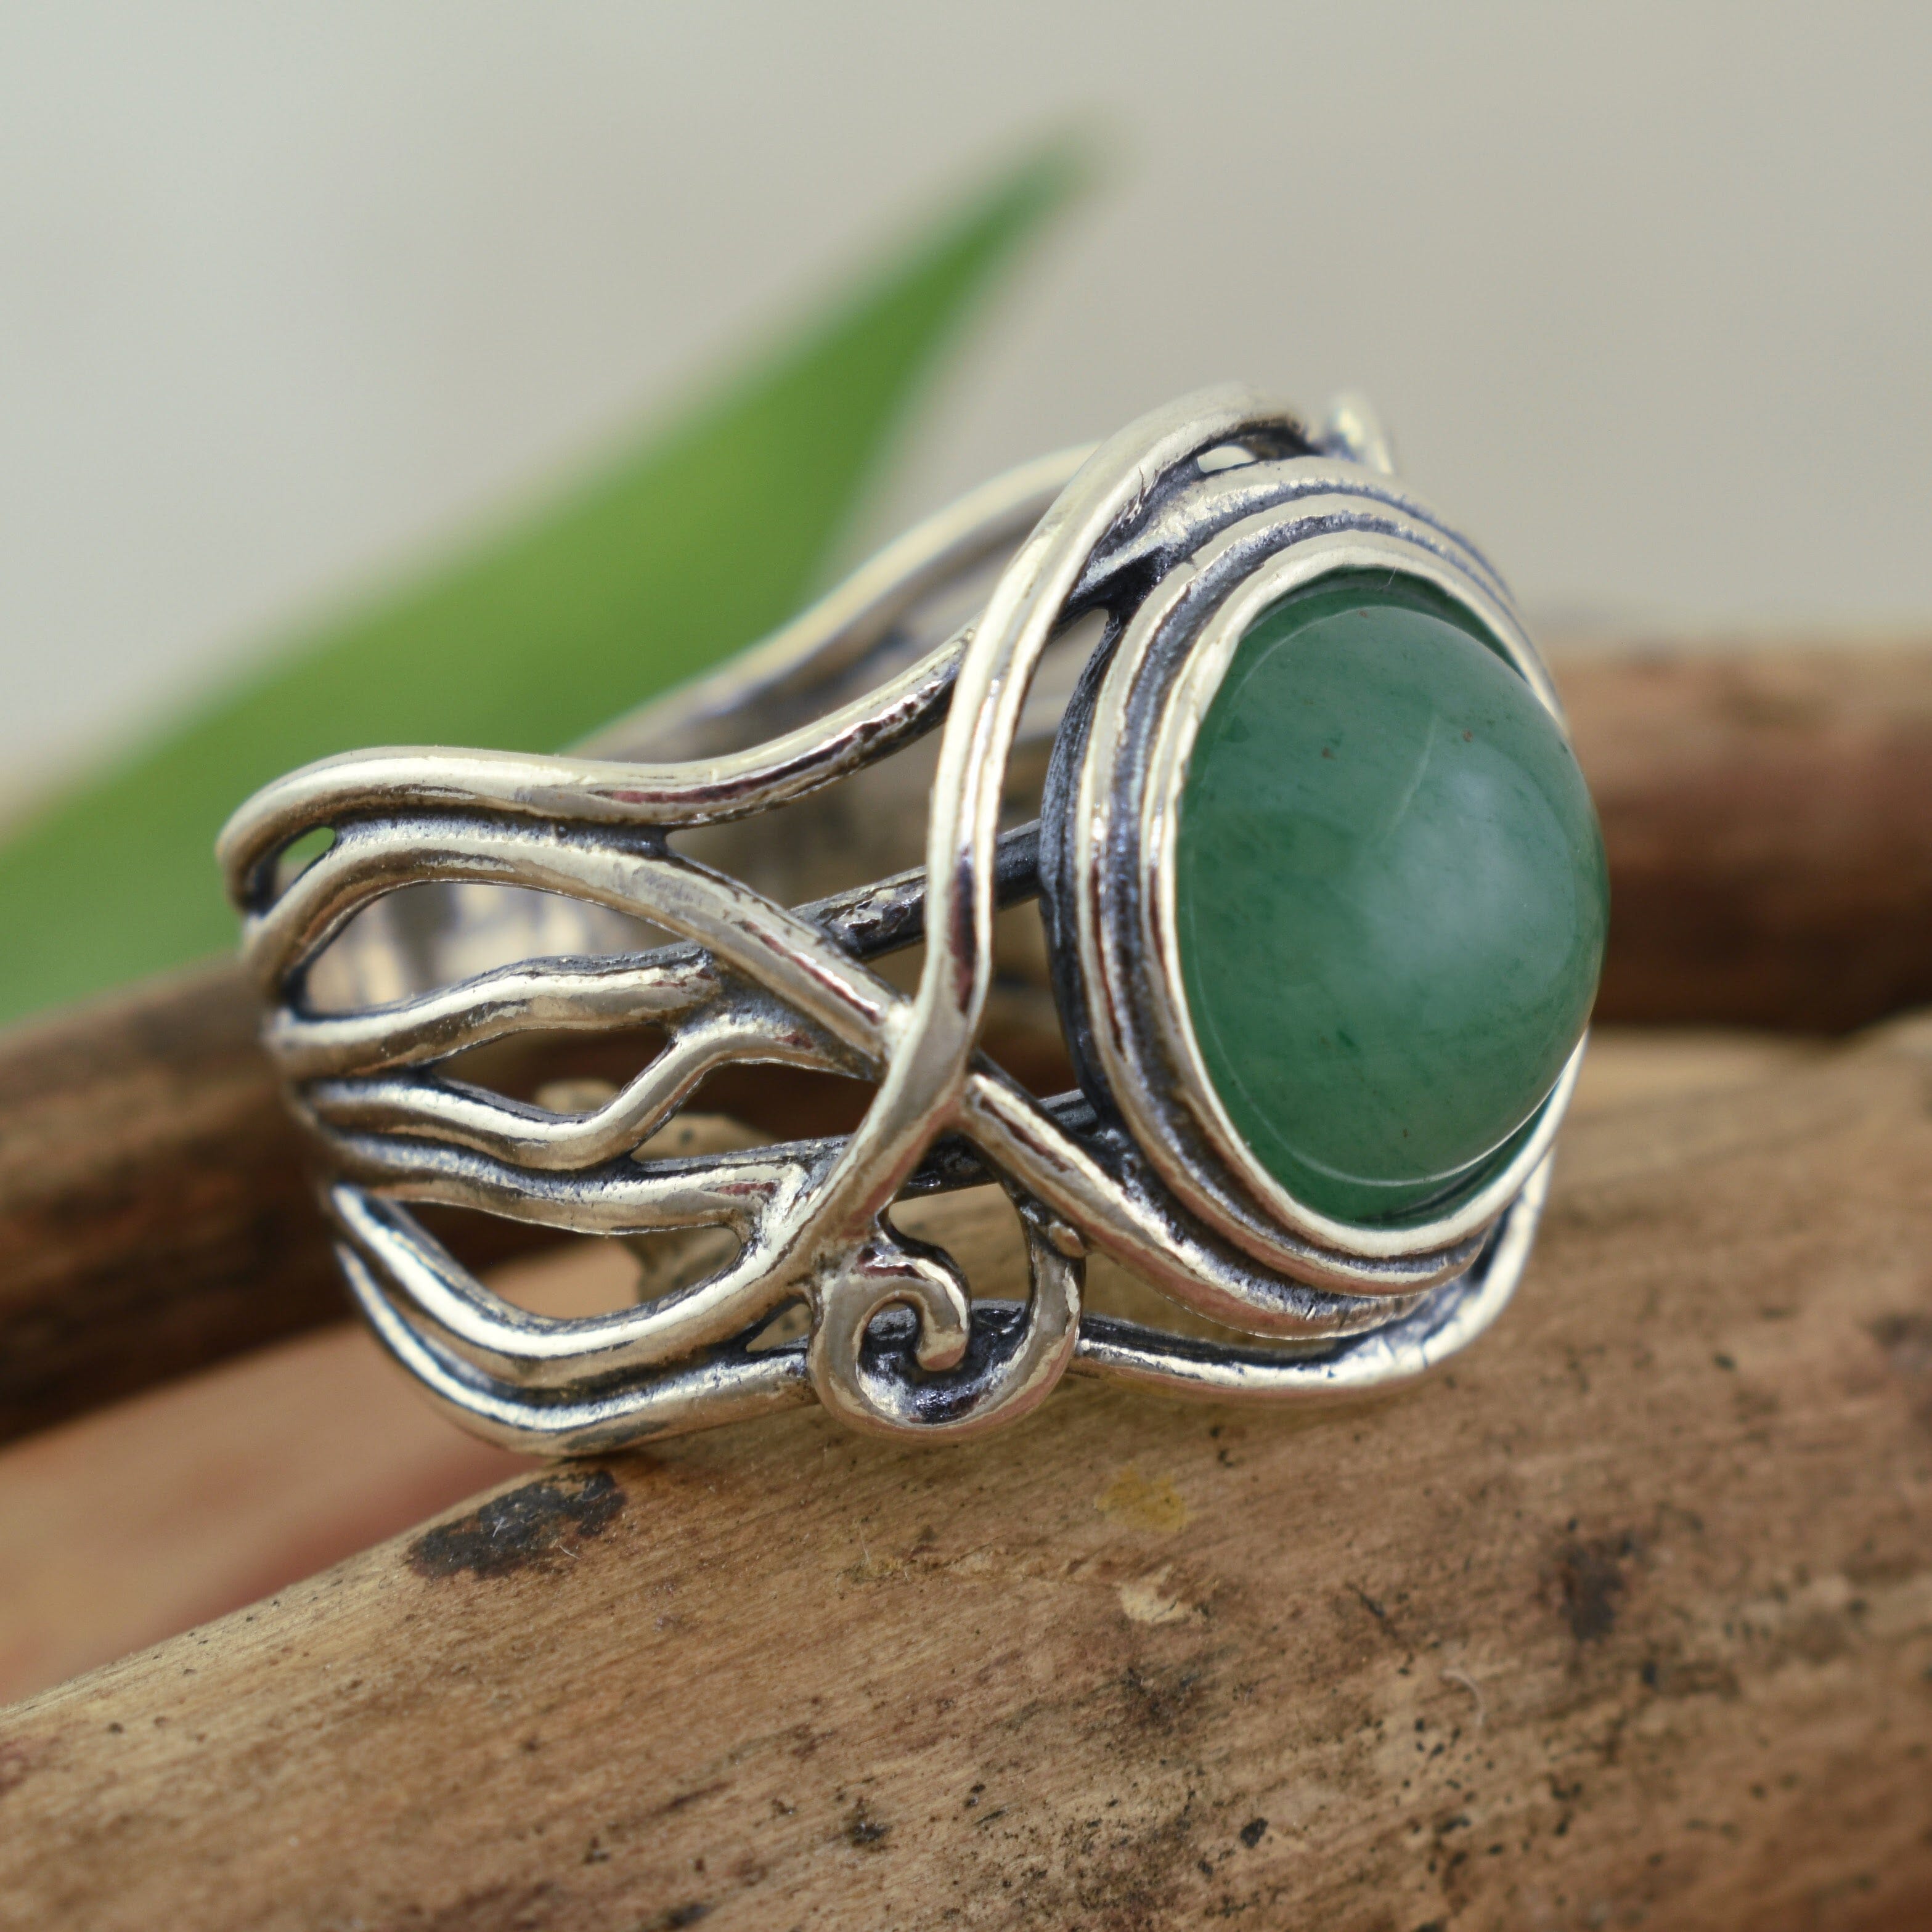 Green aventurine stone set in antiqued .925 sterling silver